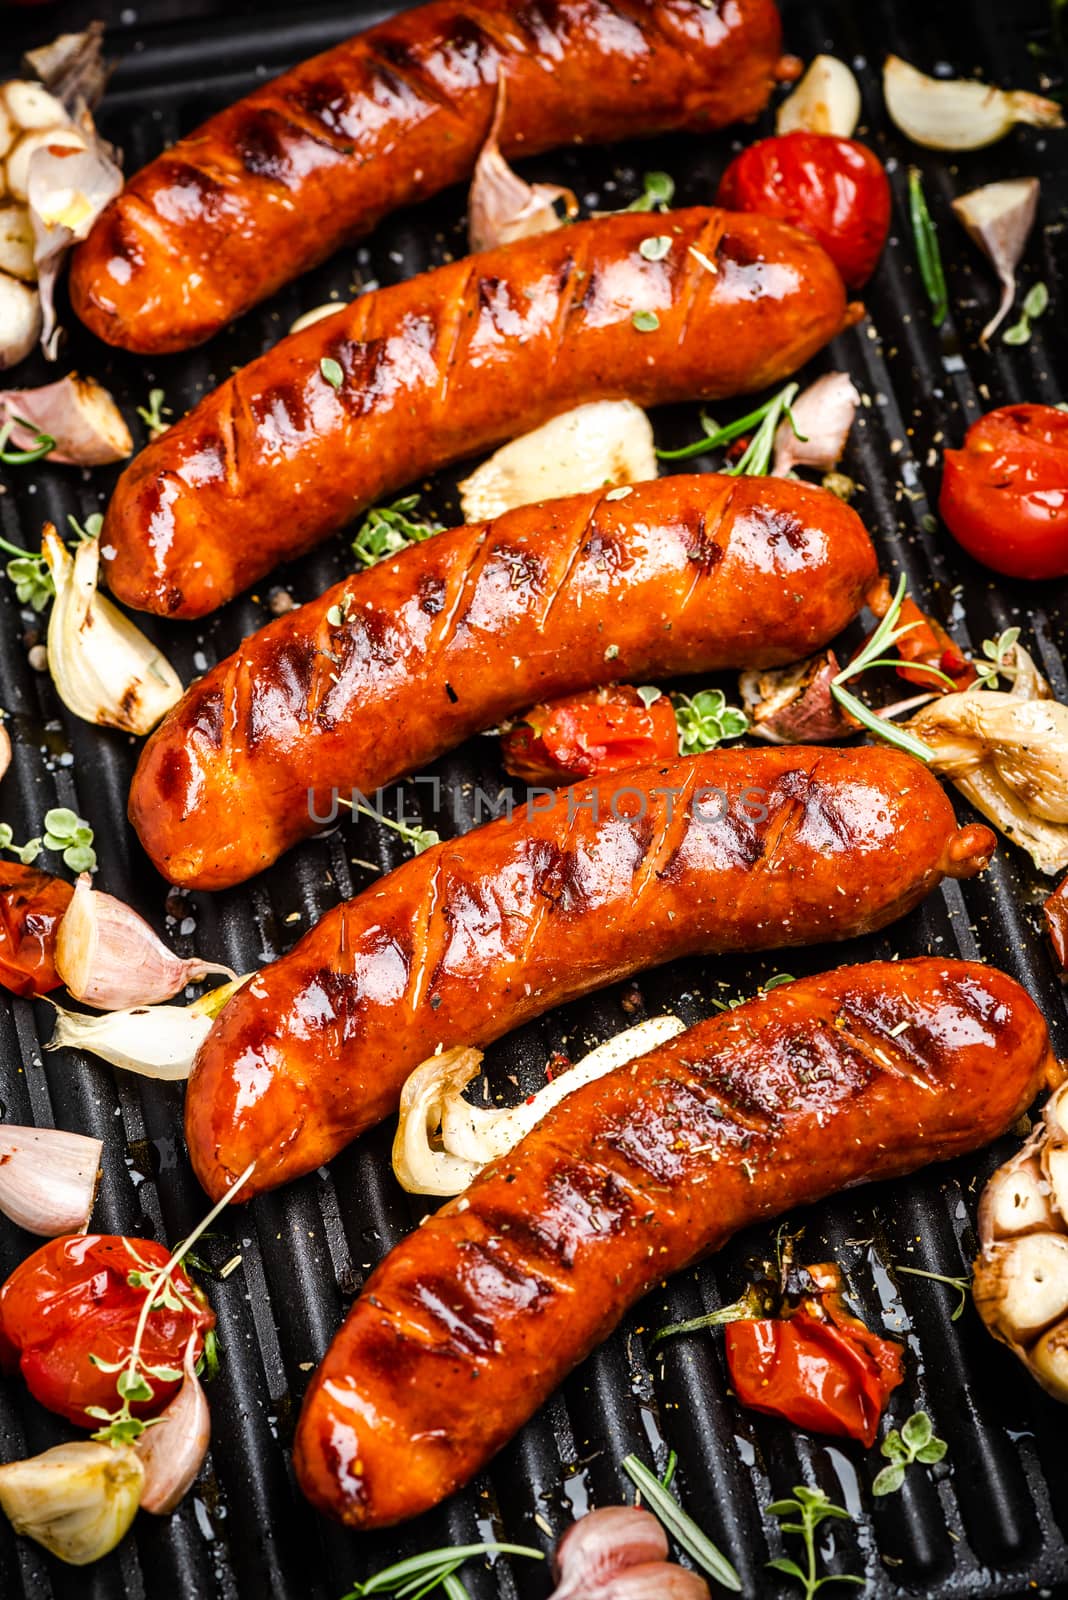 BBQ Grilled Meat Sausages with Herbs,Spices and Vegetables. Summer Party Food .